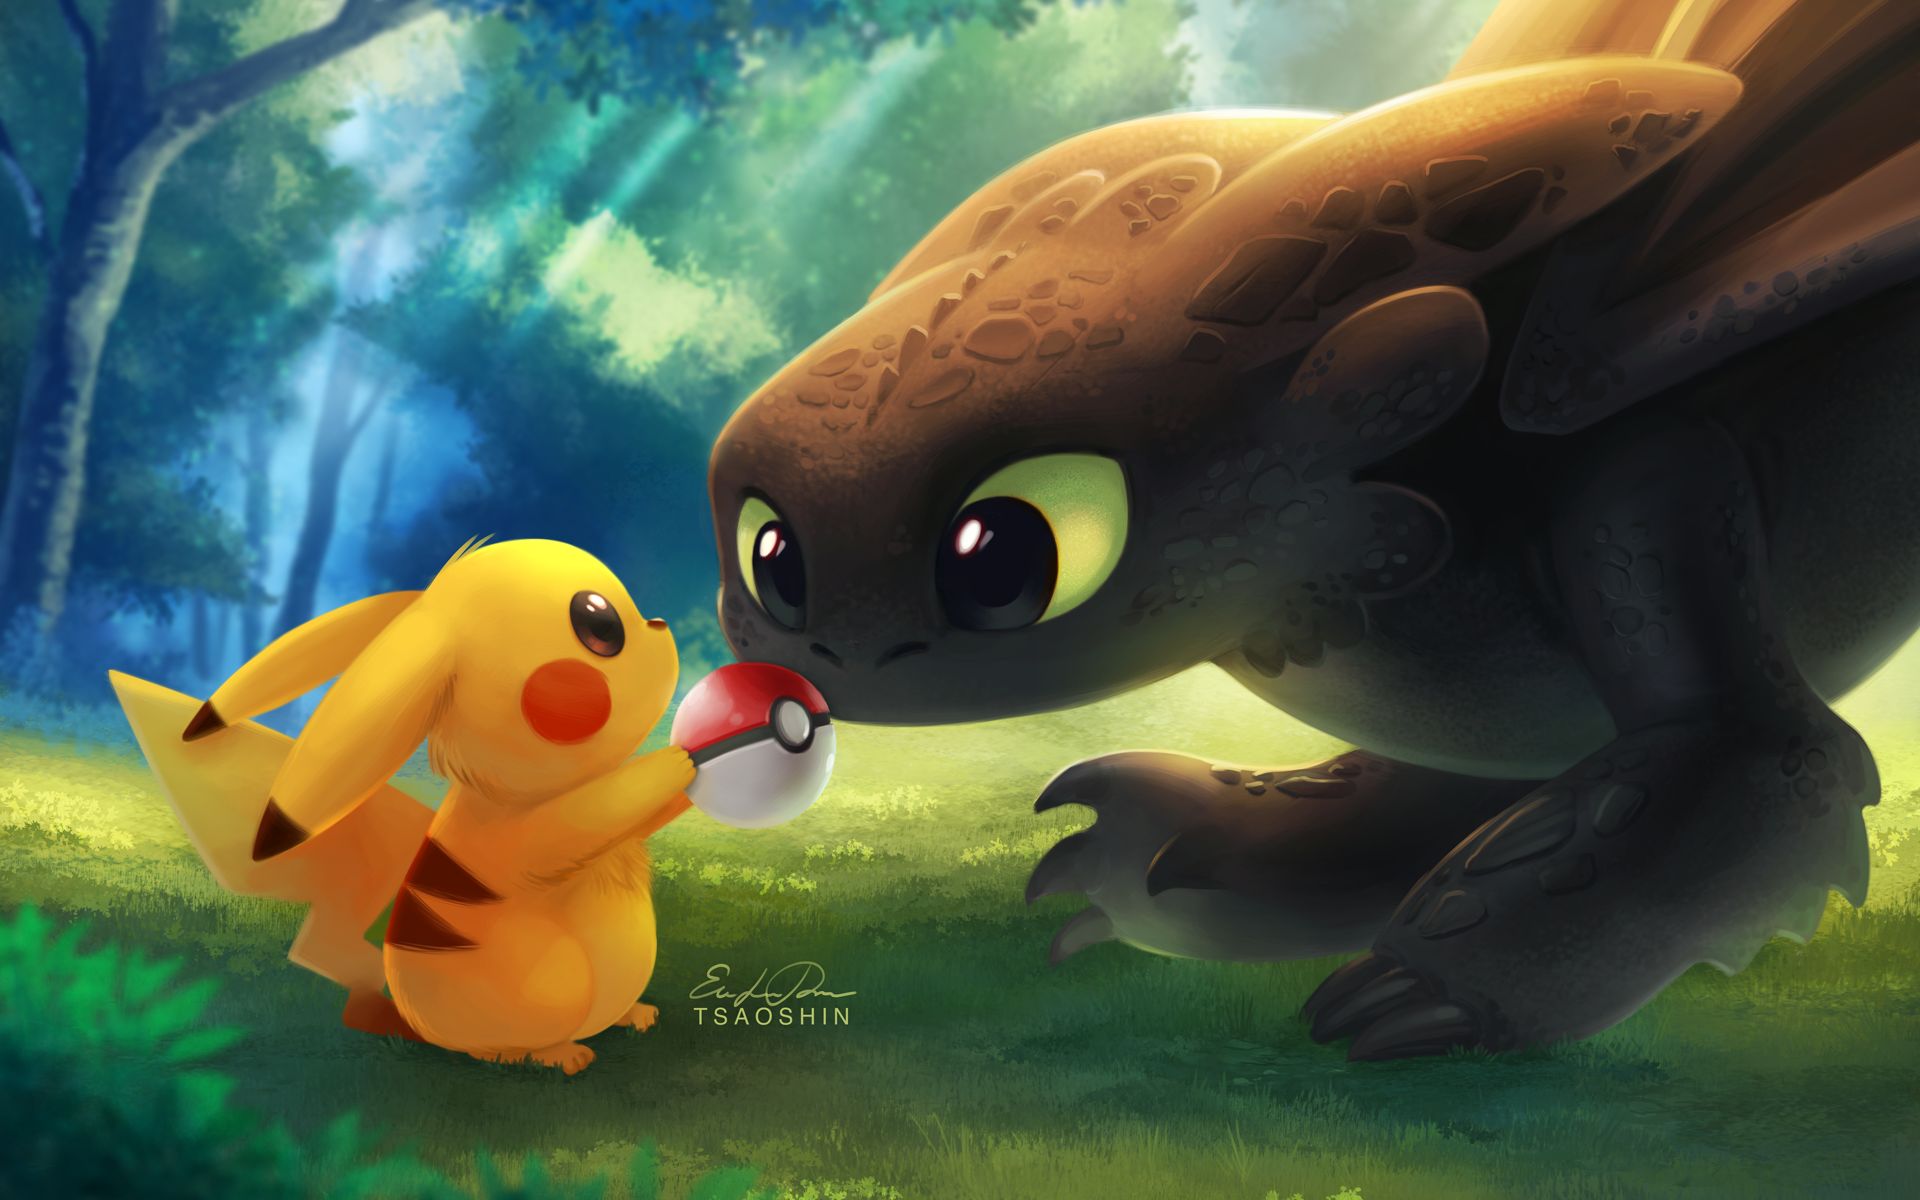 how to train your dragon, cute, movie, crossover, pikachu, pokeball, pokémon, toothless (how to train your dragon)